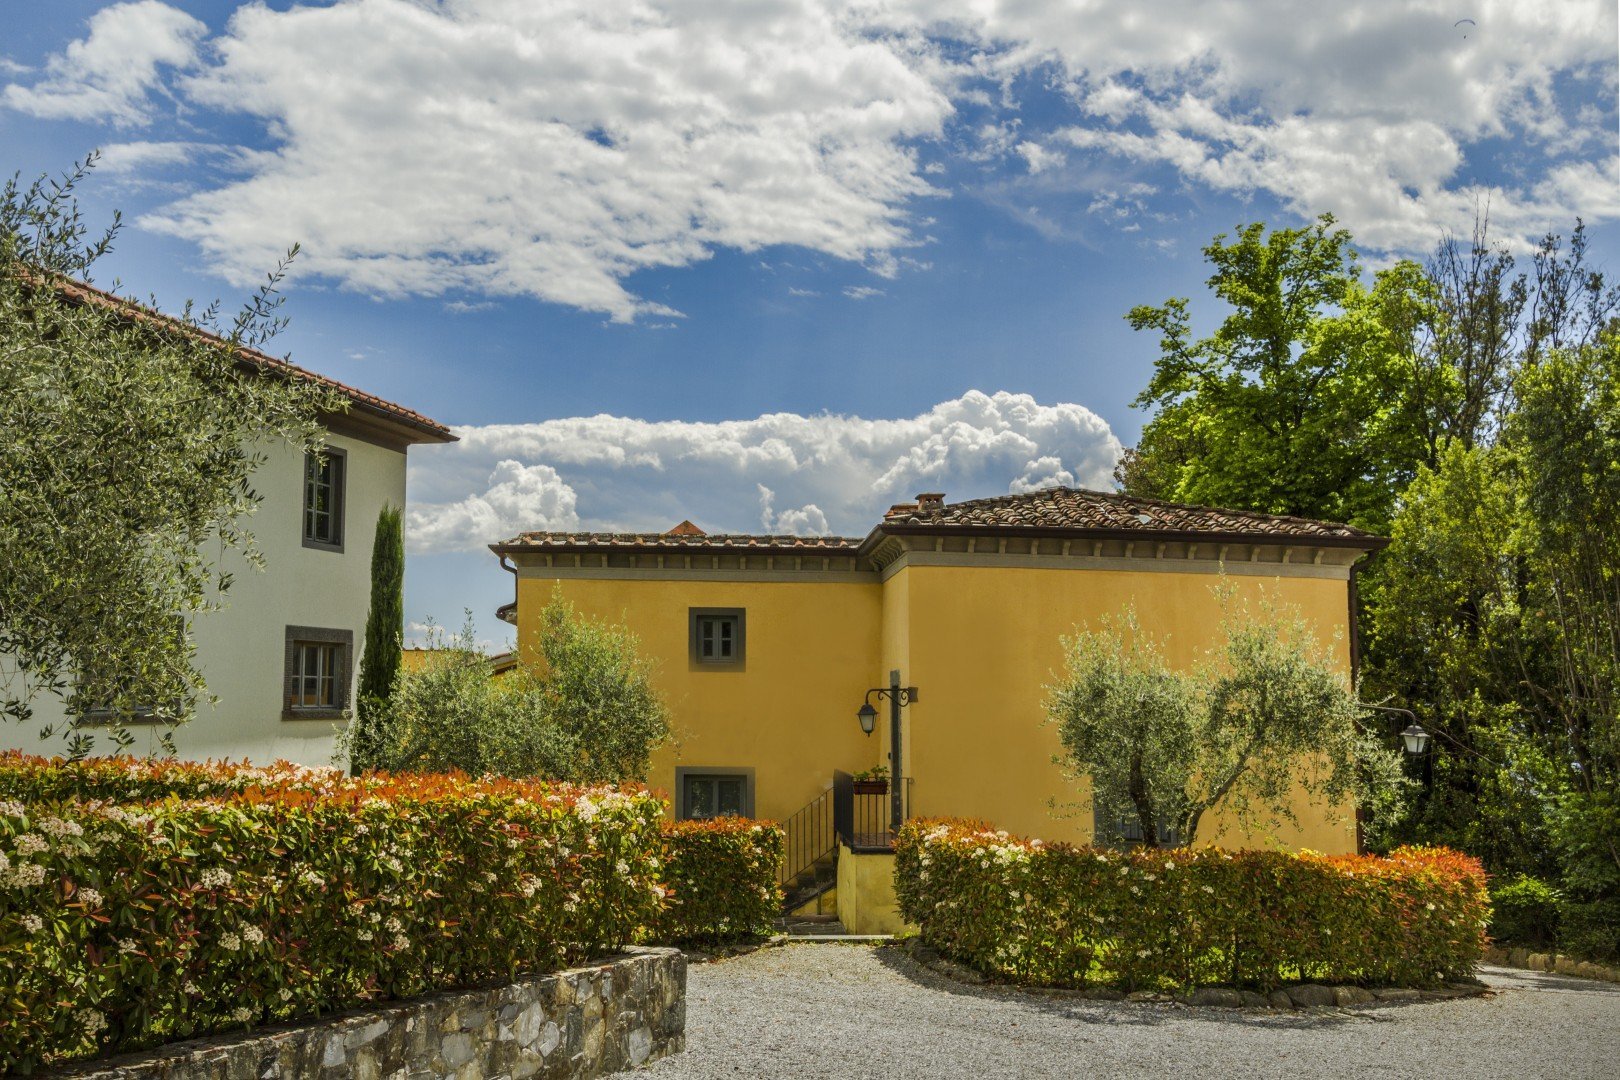 Francis York Boutique Tuscan Hamlet in the Lucca Hills 12.jpg